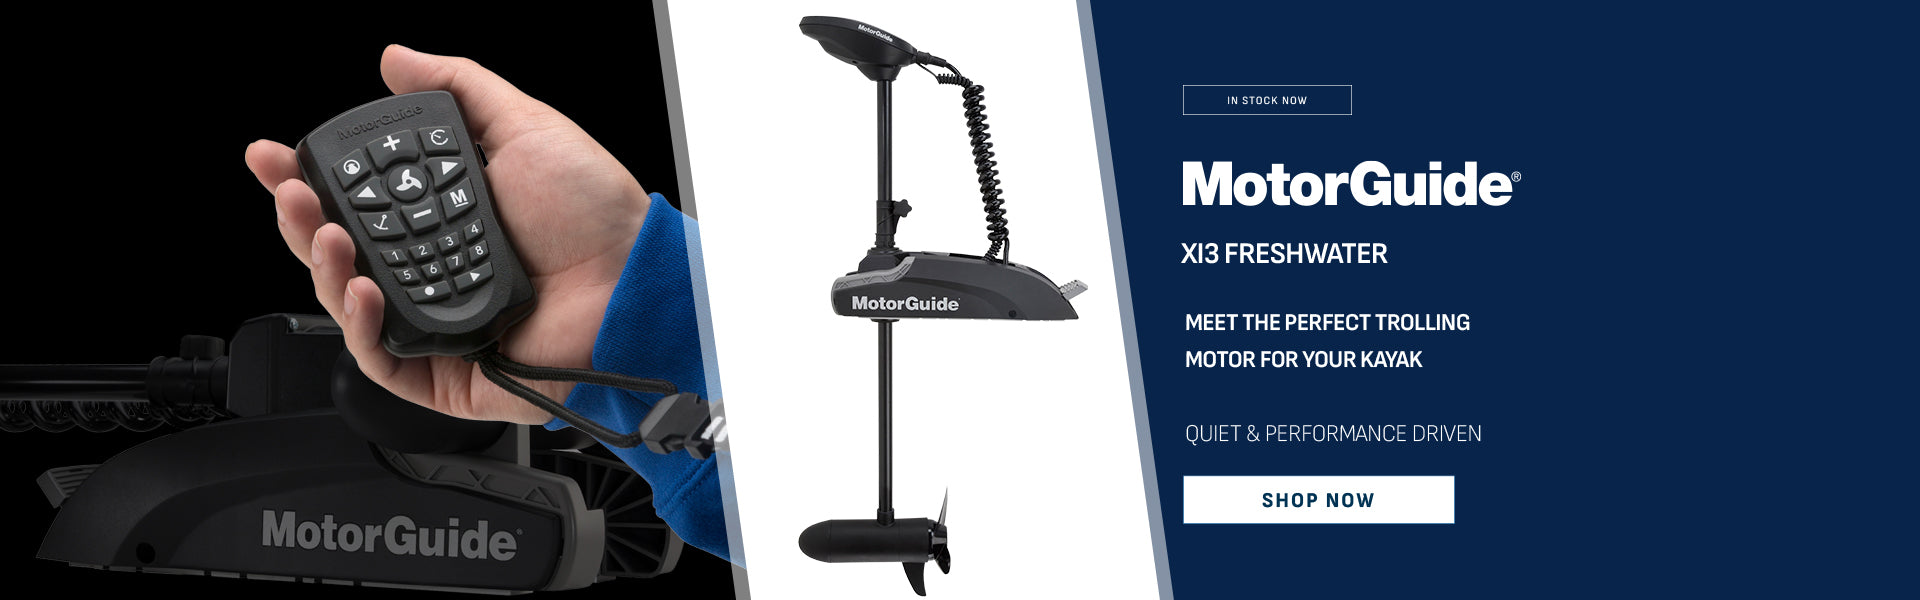 In-Stock Now: The MorotGuide® XI3 Freshwater: Meet The Perfect Trolling Motor for Your Kayak, Quiet & Performance Driven. Shop Now